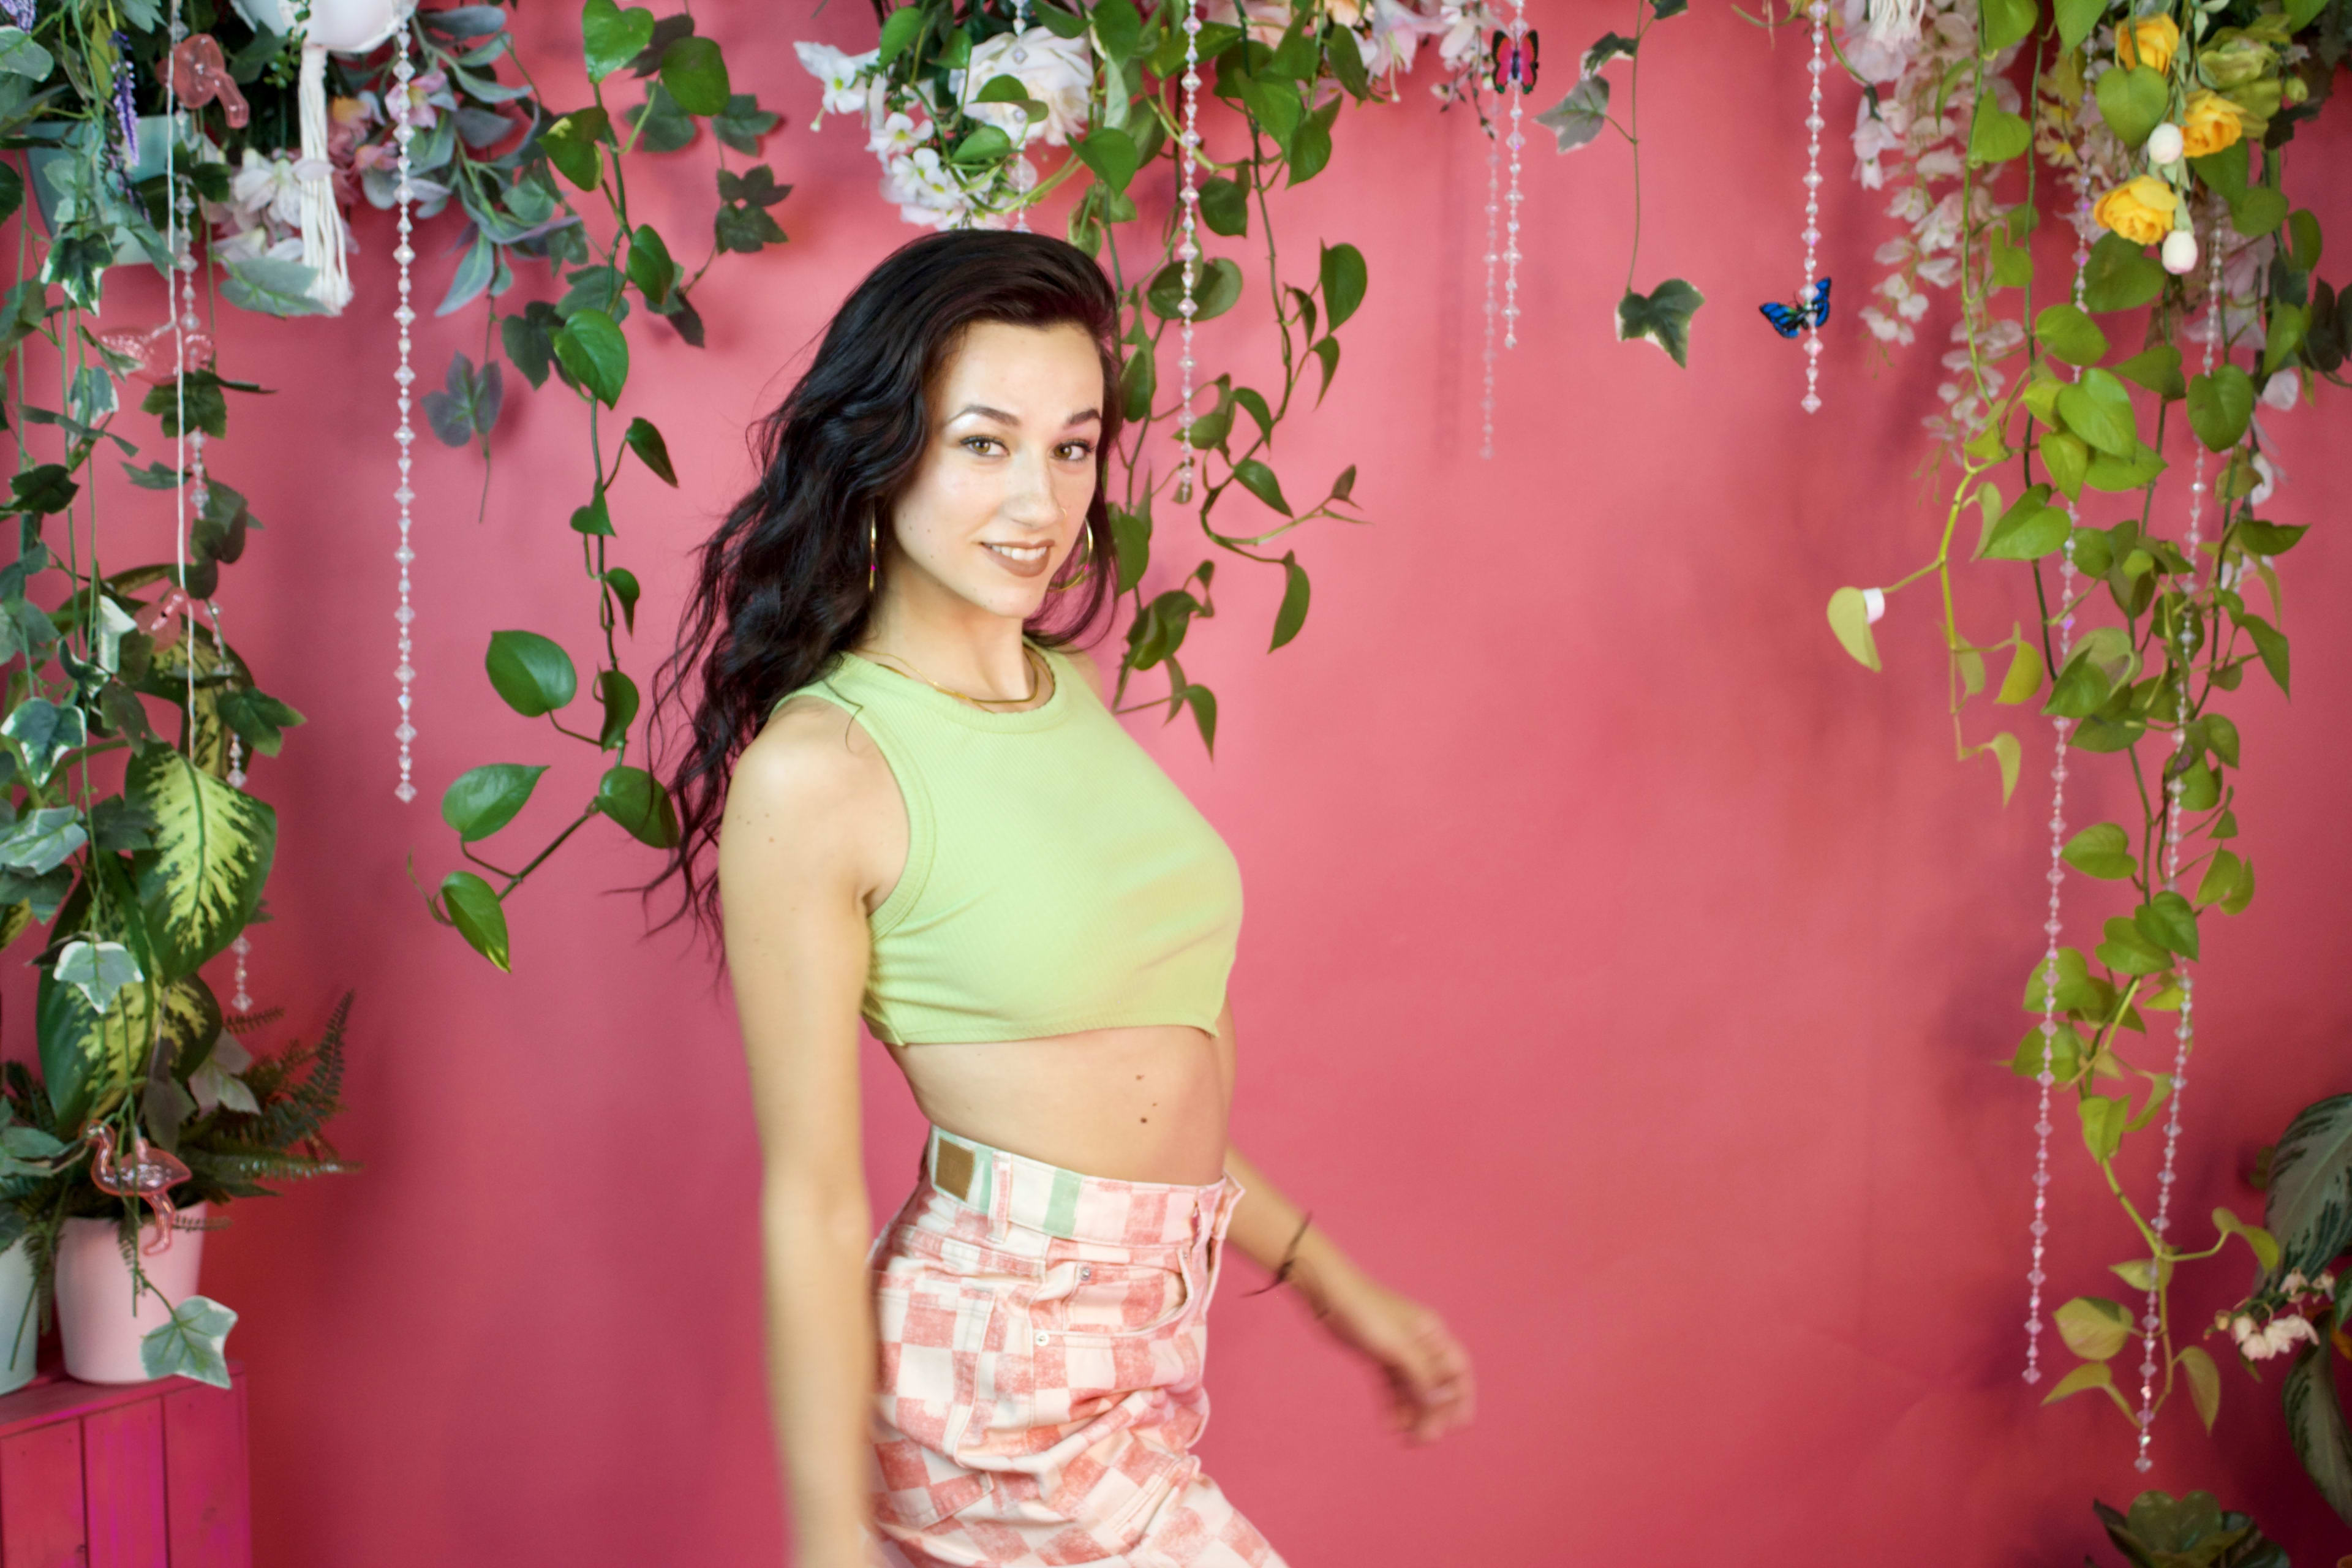 A woman posing in front of a pink wall for a fashion photo shoot.